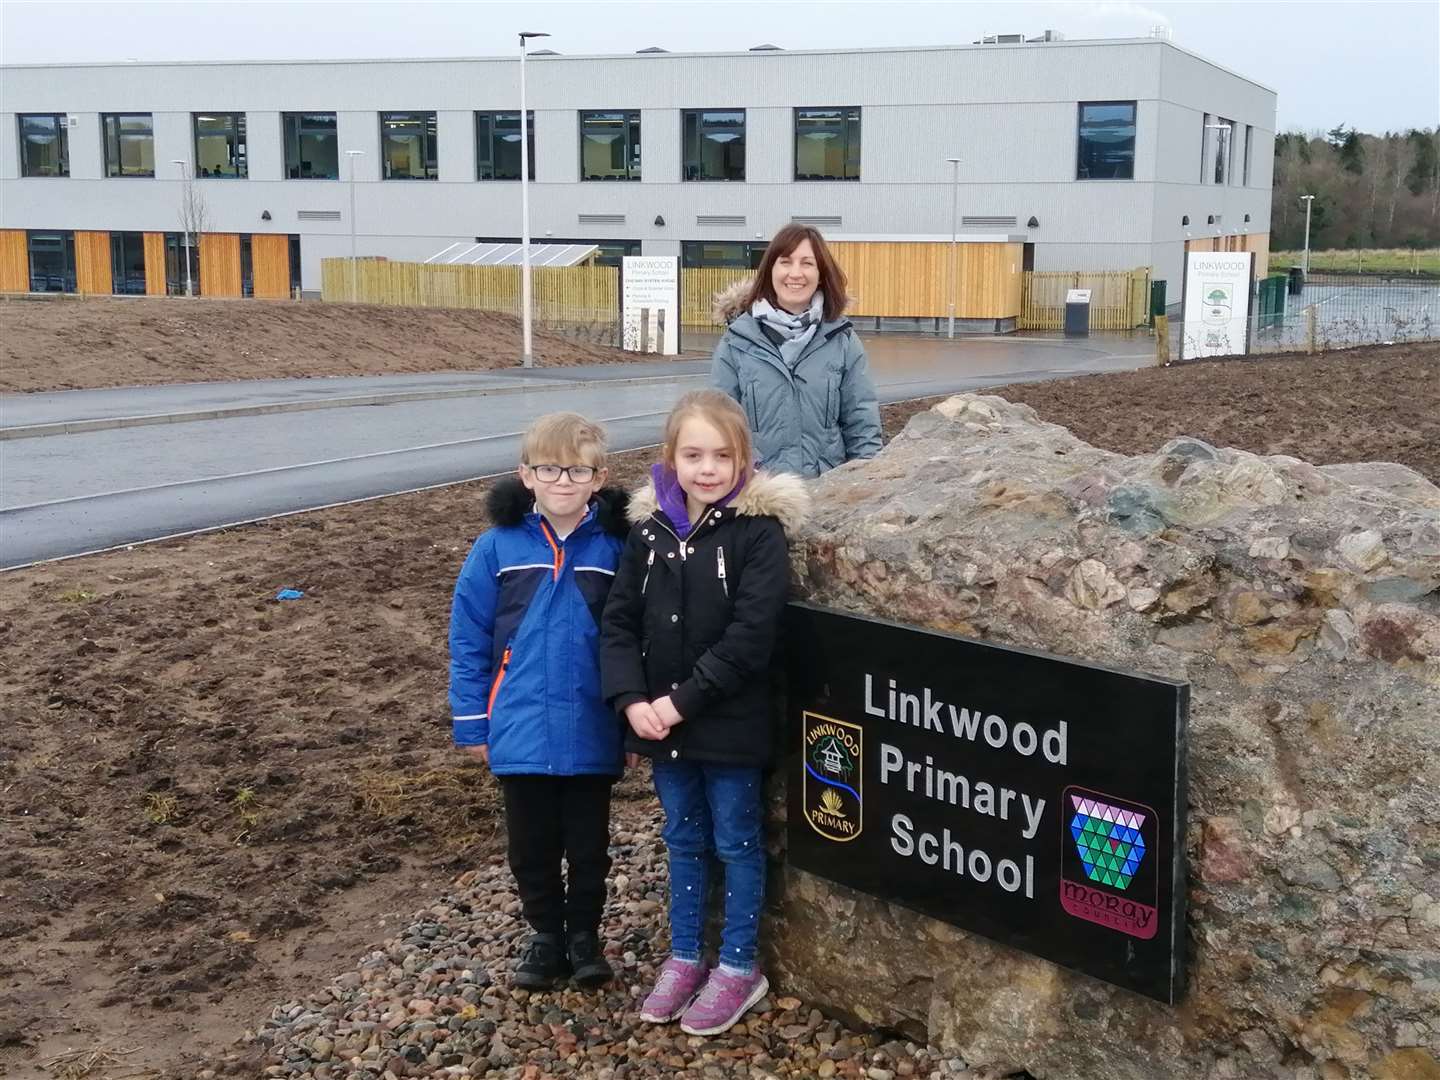 Linkwood Primary School was opened this morning. Head teacher Fiona Stevenson is pictured here with P3 pupil William Forbes and P2 pupil Louise Buchan.